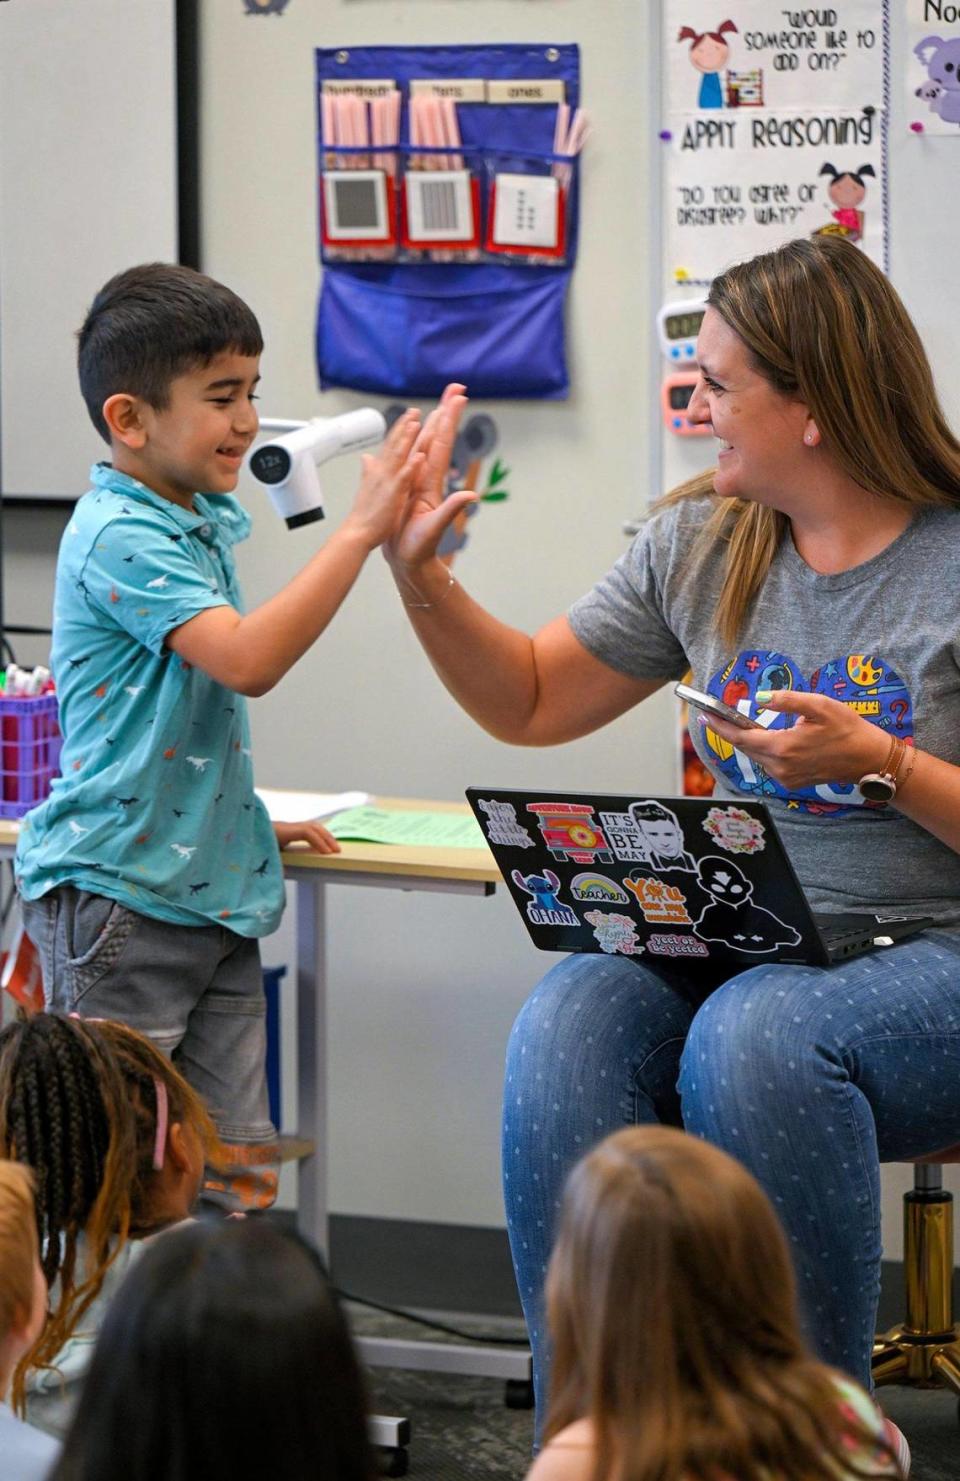 Abu Saidov, a first grader, high-fives teacher Mary Krejci, after she used Google Translate to translate a word from English to Russian so Abu could understand her question on May 10, 2023, at Piper Prairie Elementary School in Kansas City, Kansas. Krejci was announced as the winner of the Kansas City Star’s Honor Roll teacher poll.